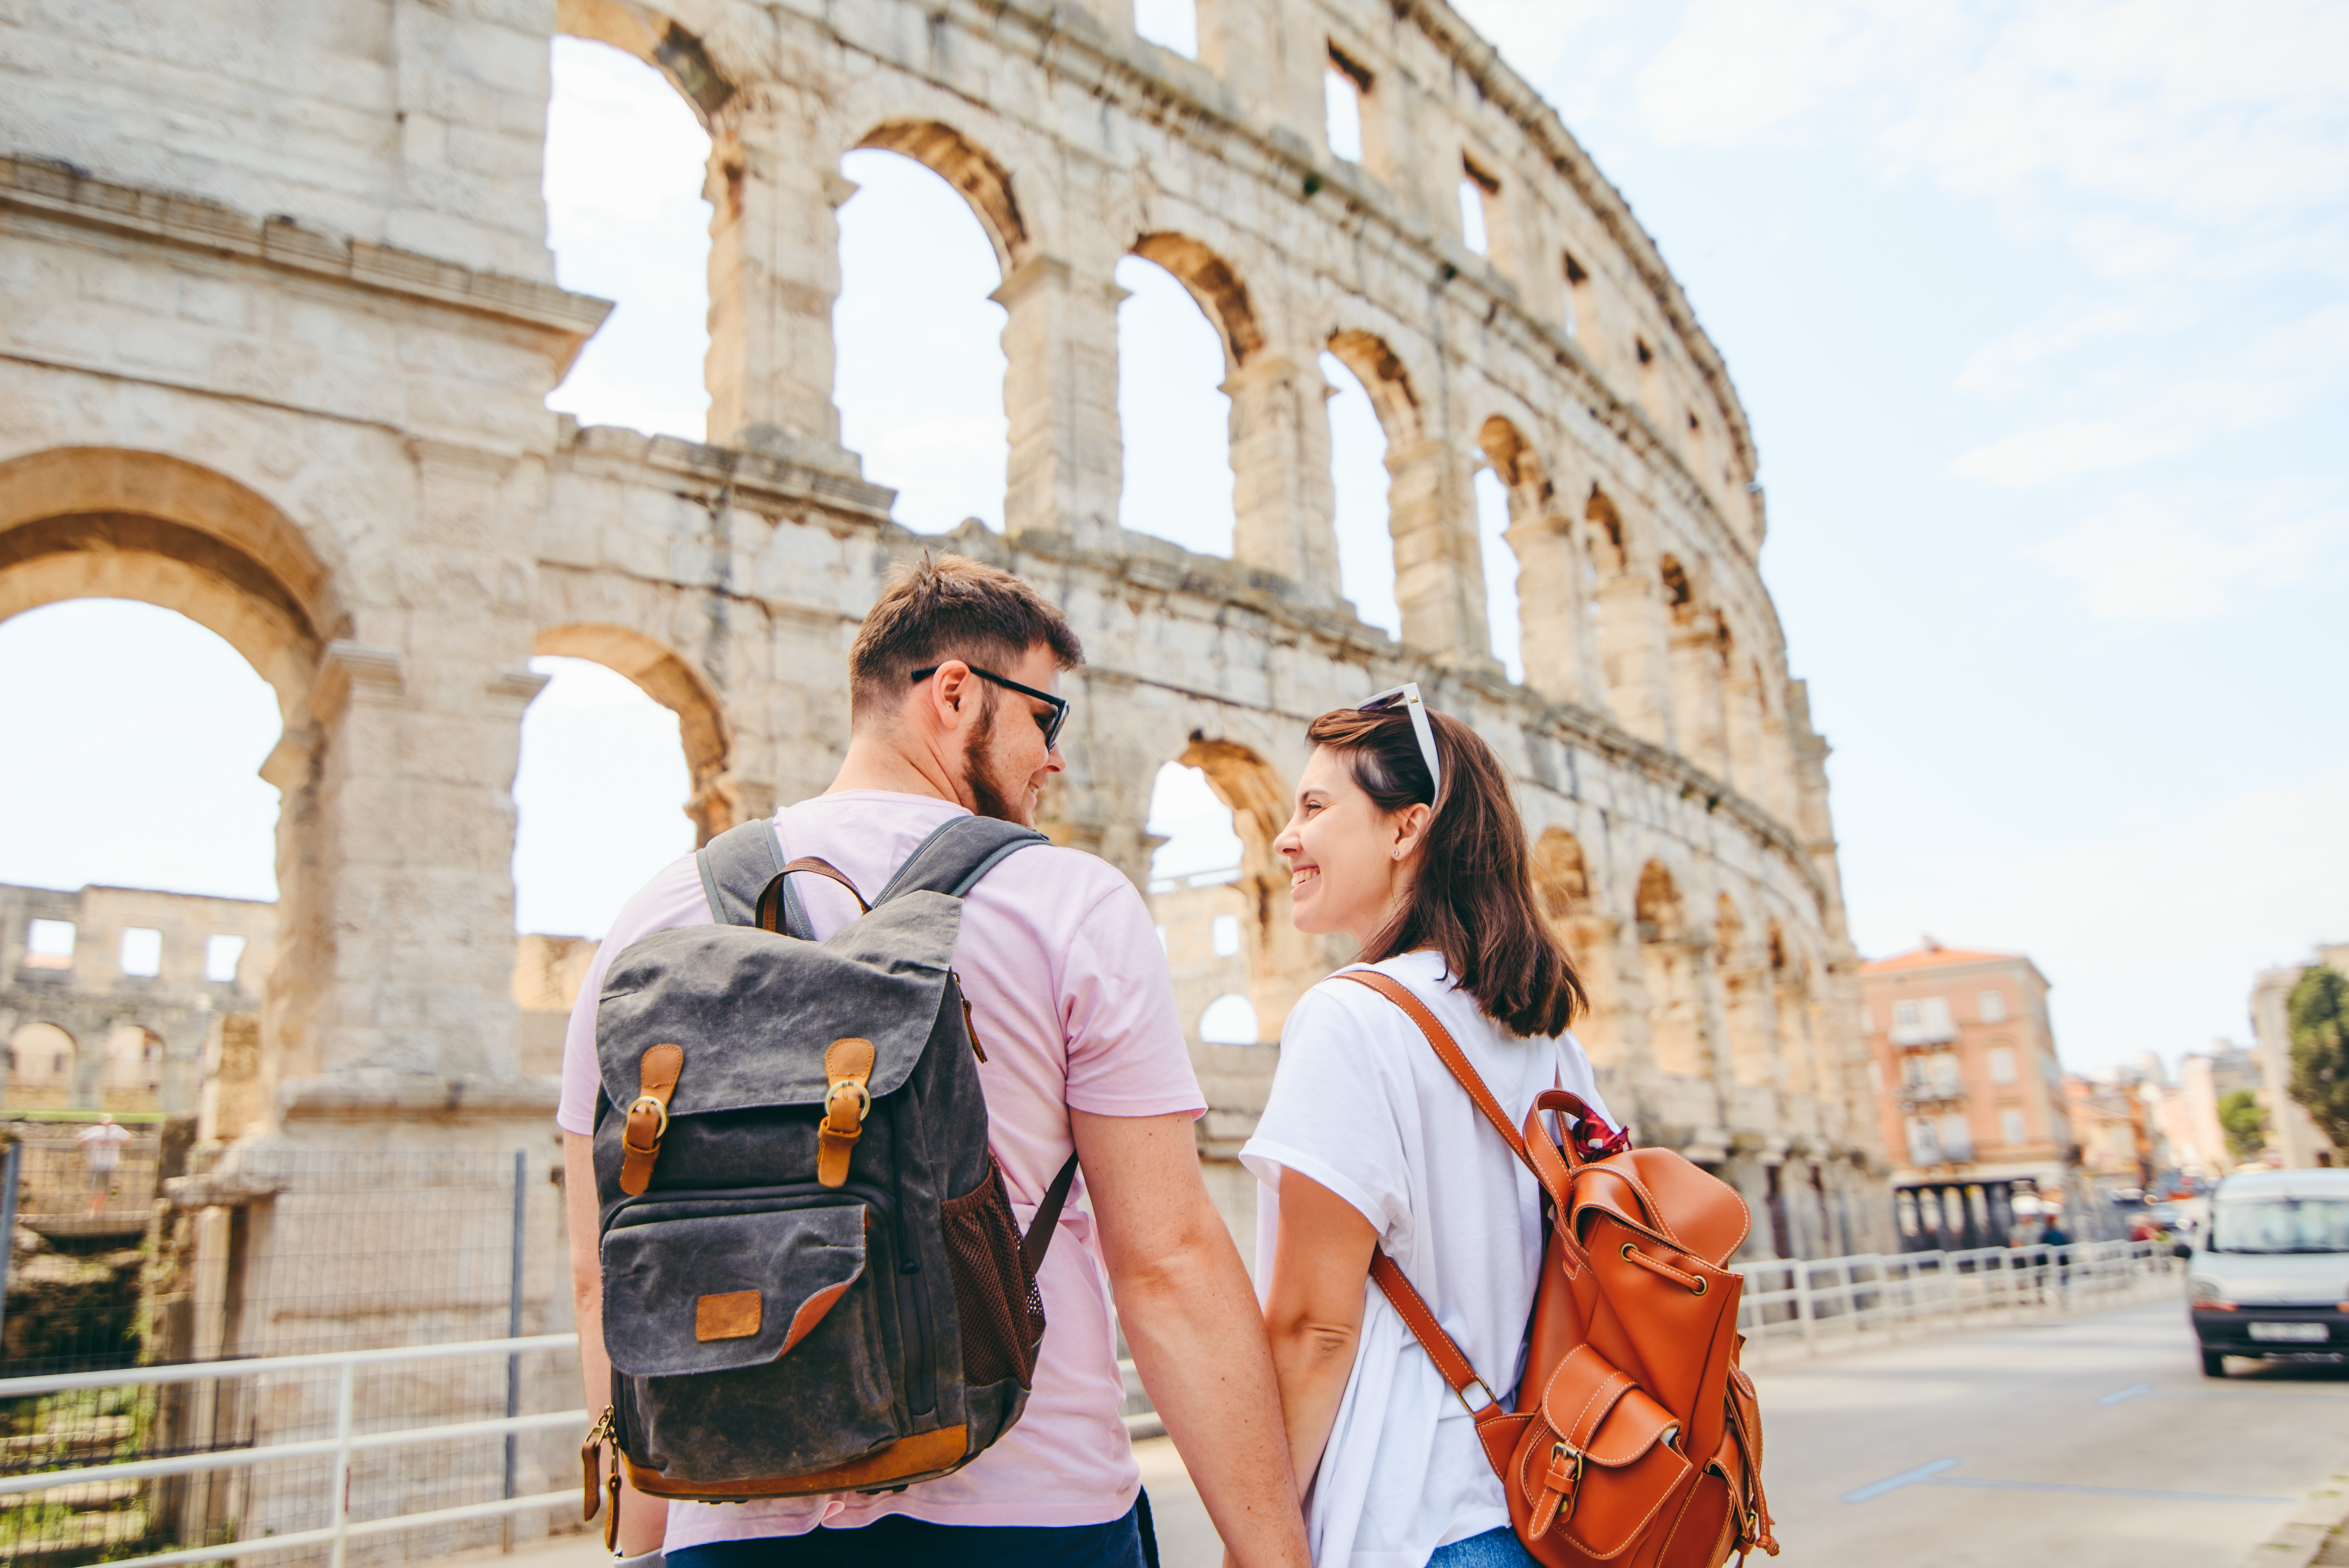 A couple in Rome, Italy | Source: Shutterstock